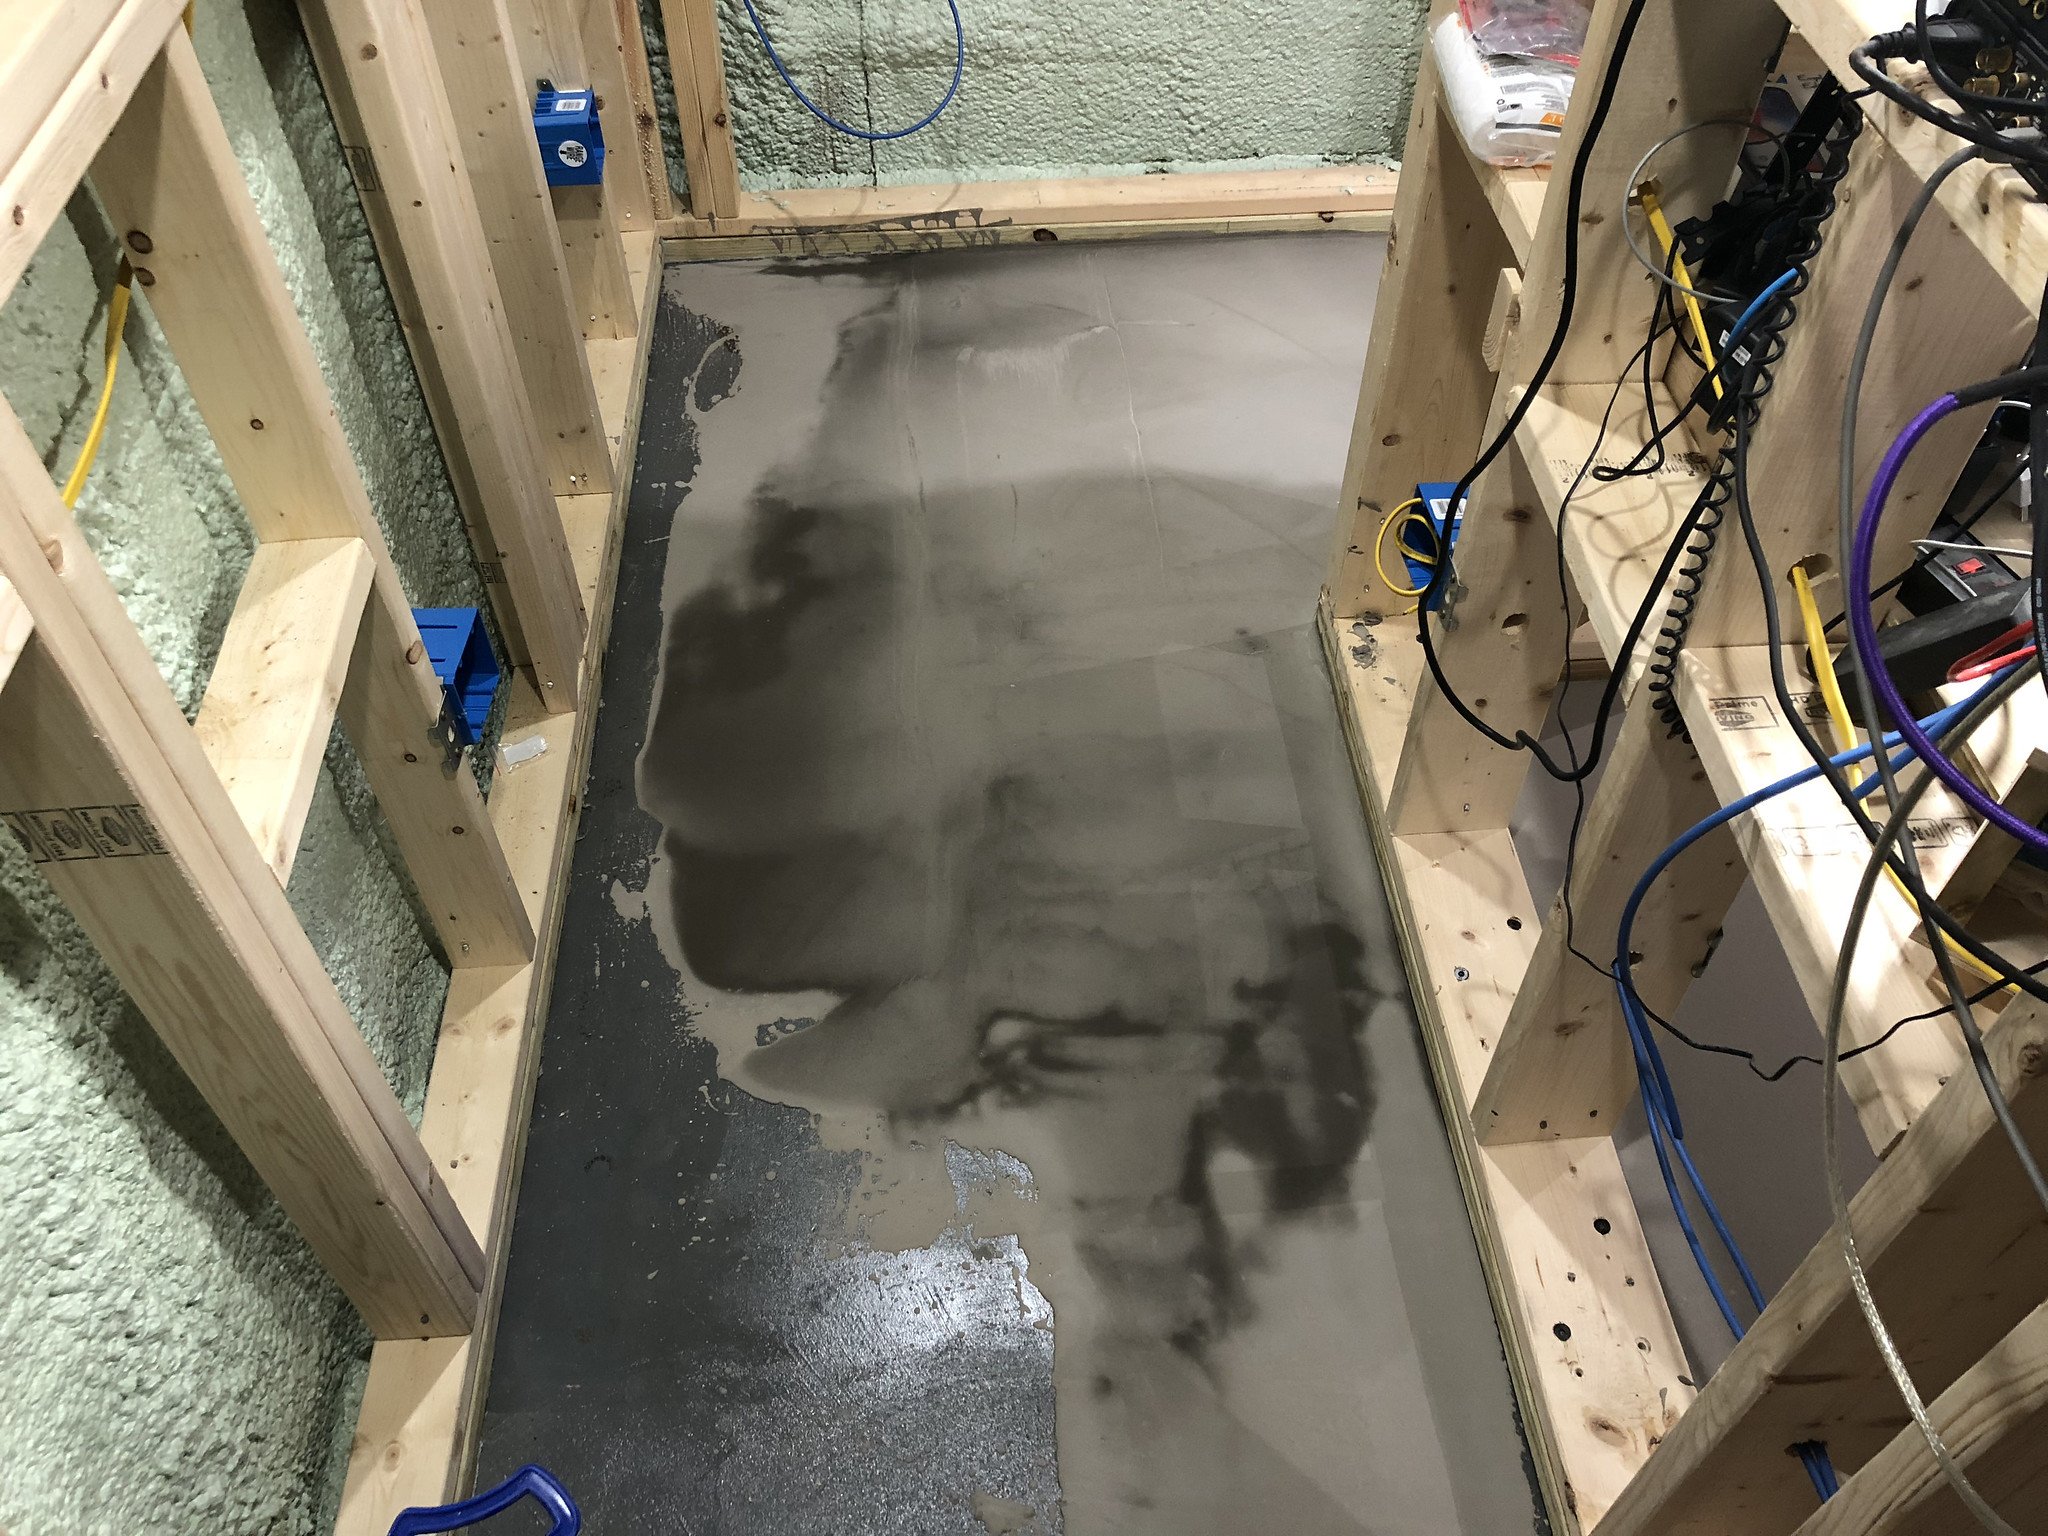 Self Leveling Compound On Wood Suloor, Self Leveling Concrete Over Laminate Flooring